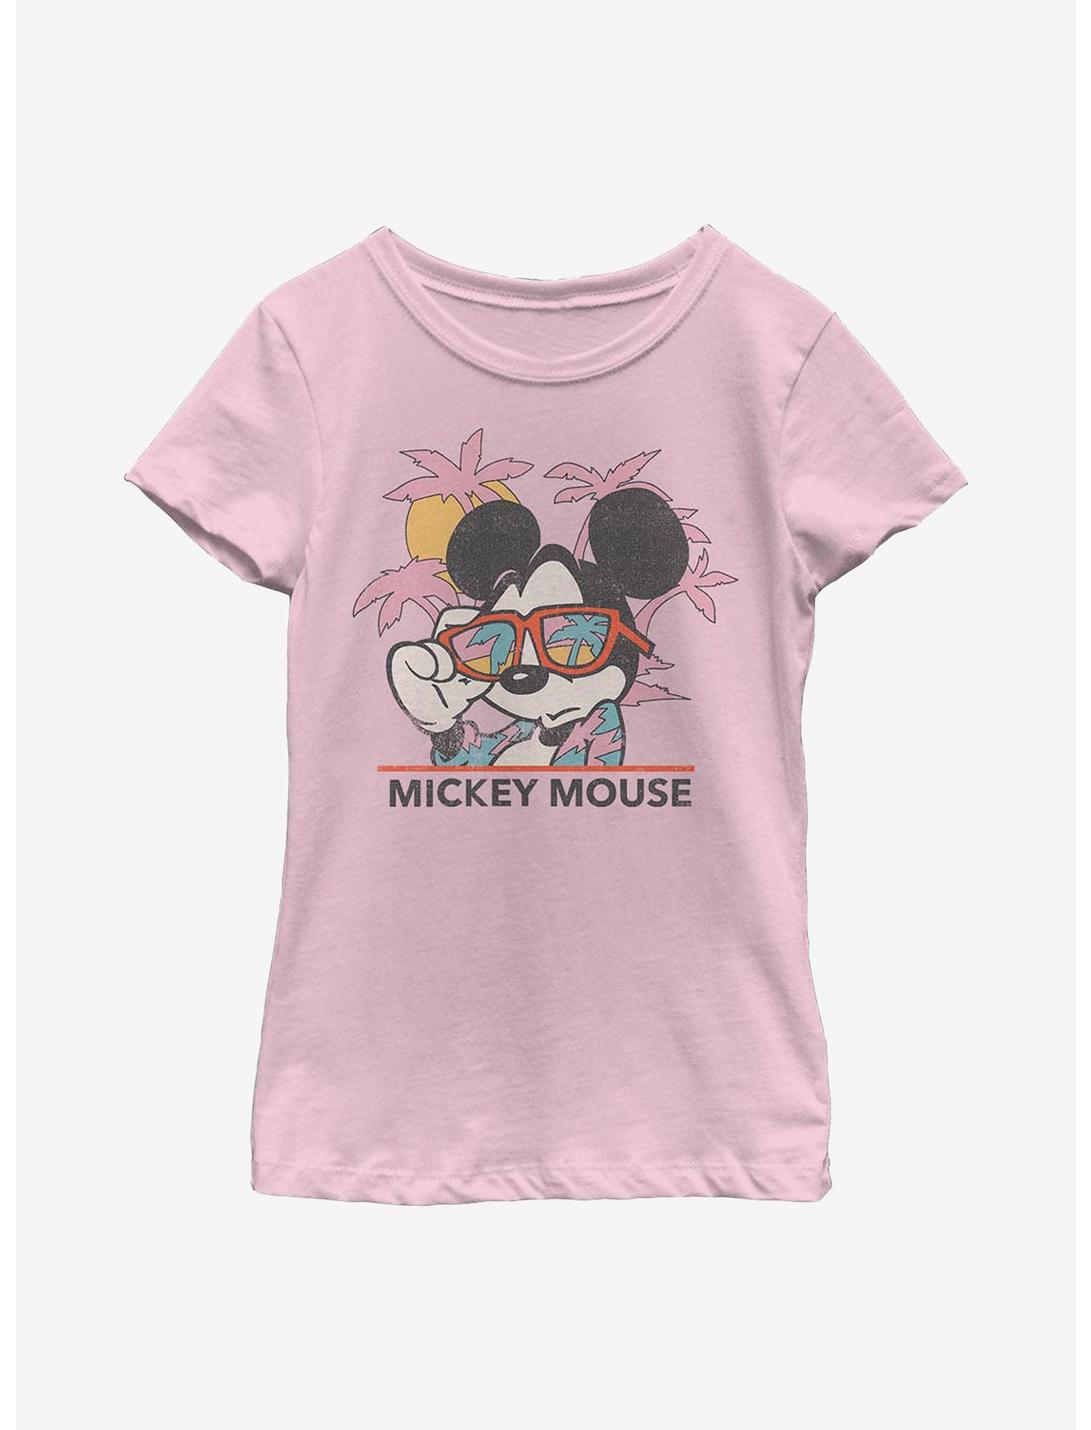 Disney Mickey Mouse Beach Youth Girls T-Shirt, PINK, hi-res